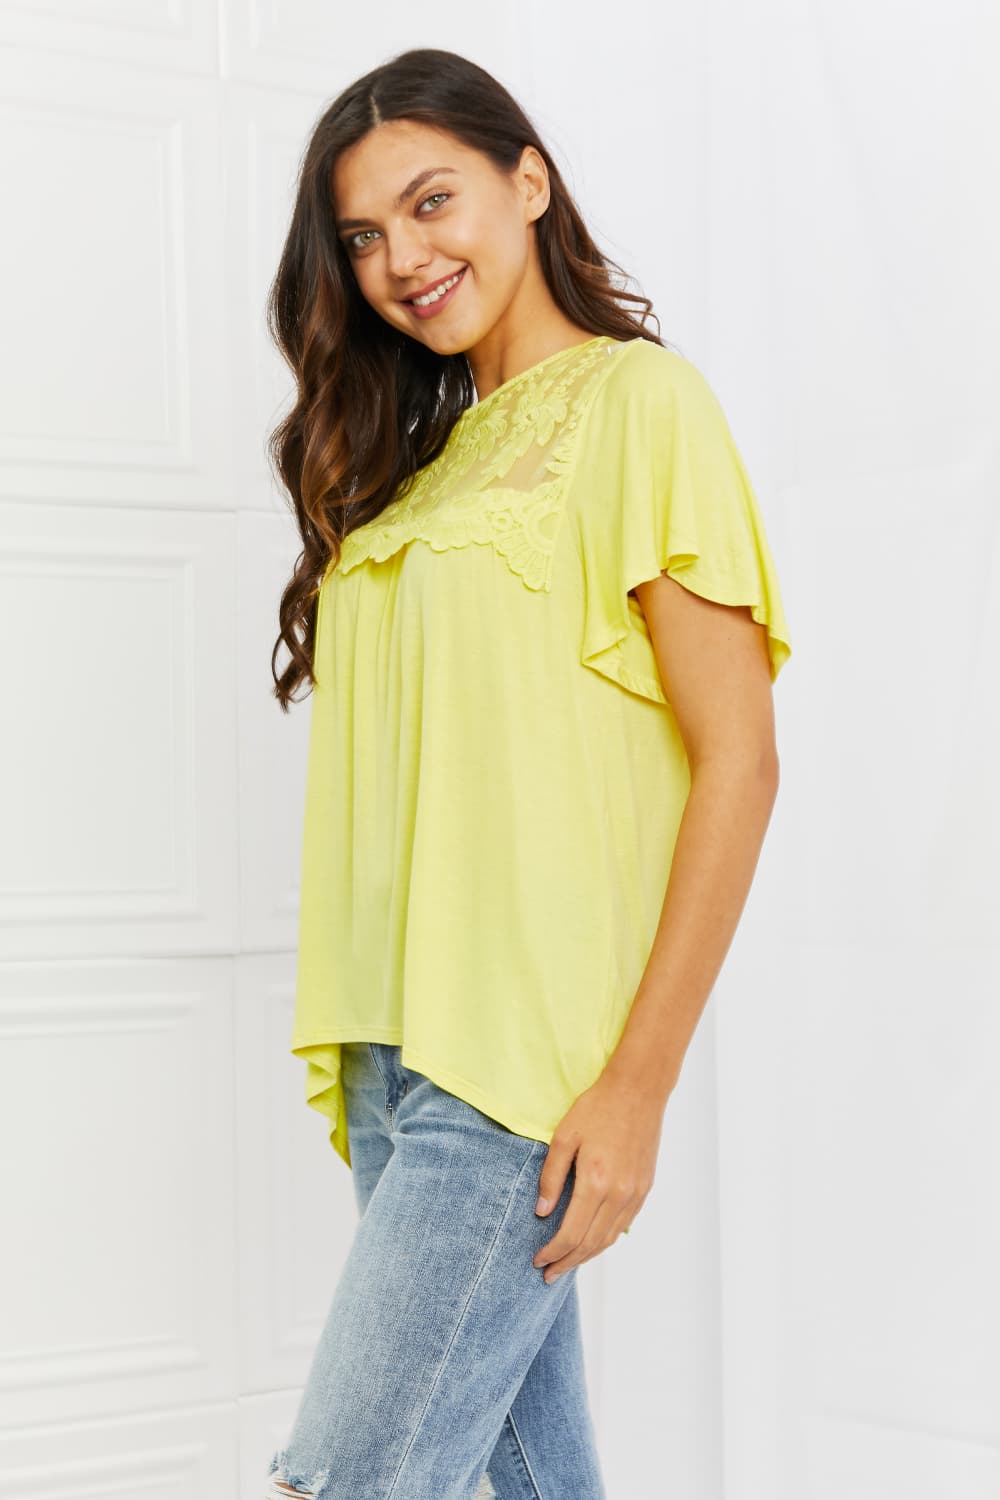 Culture Code Ready To Go Full Size Lace Embroidered Top in Yellow Mousse free shipping -Oh Em Gee Boutique